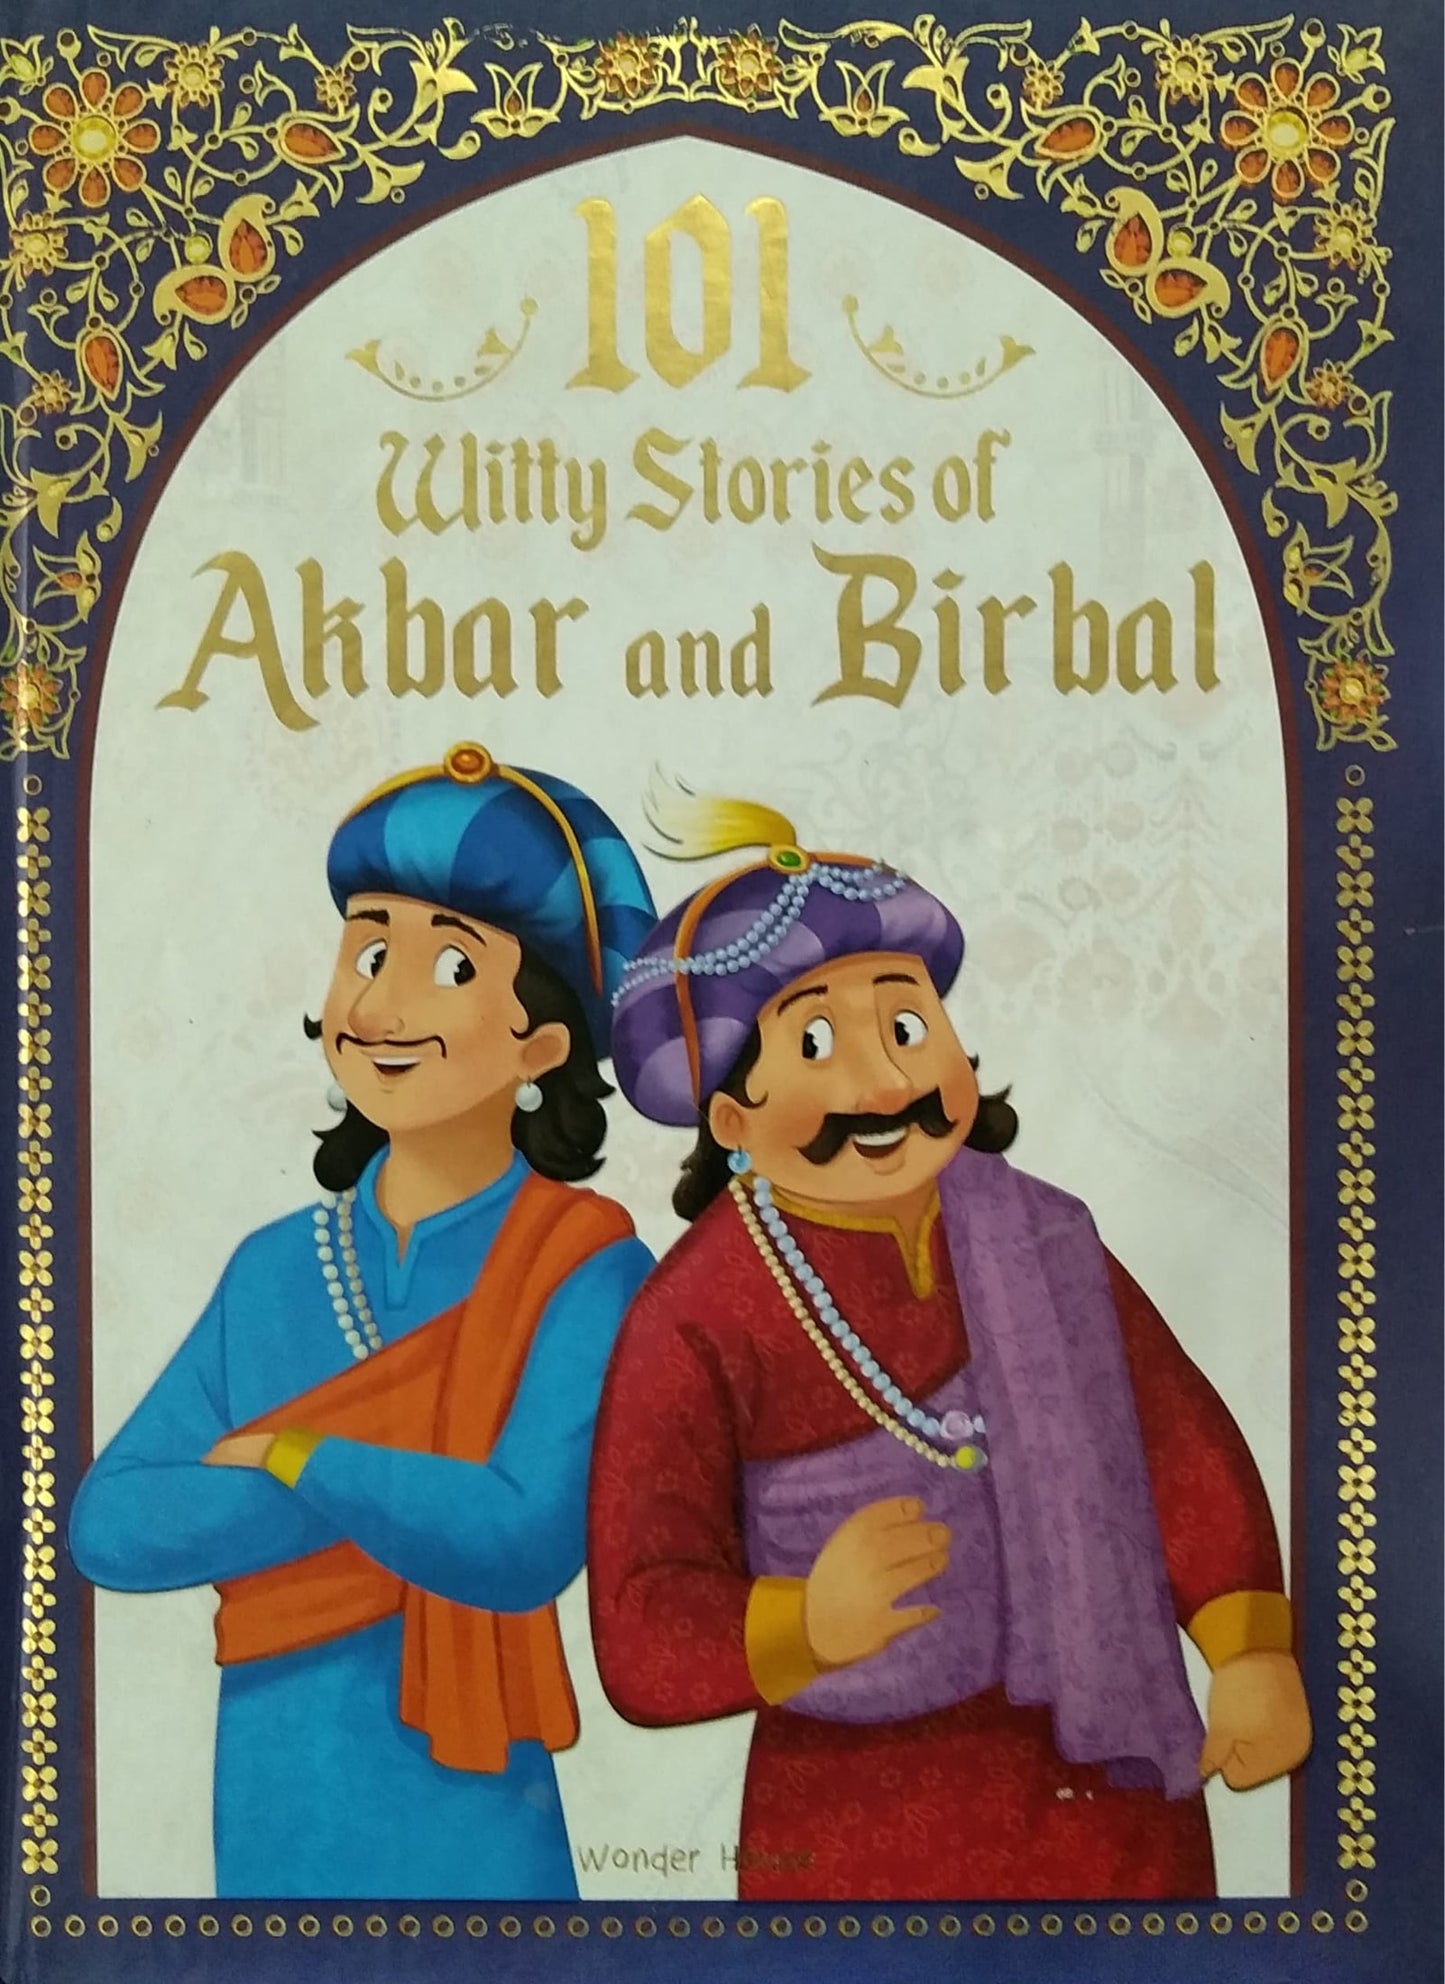 101 Witty Stories of Akbar and Birbal